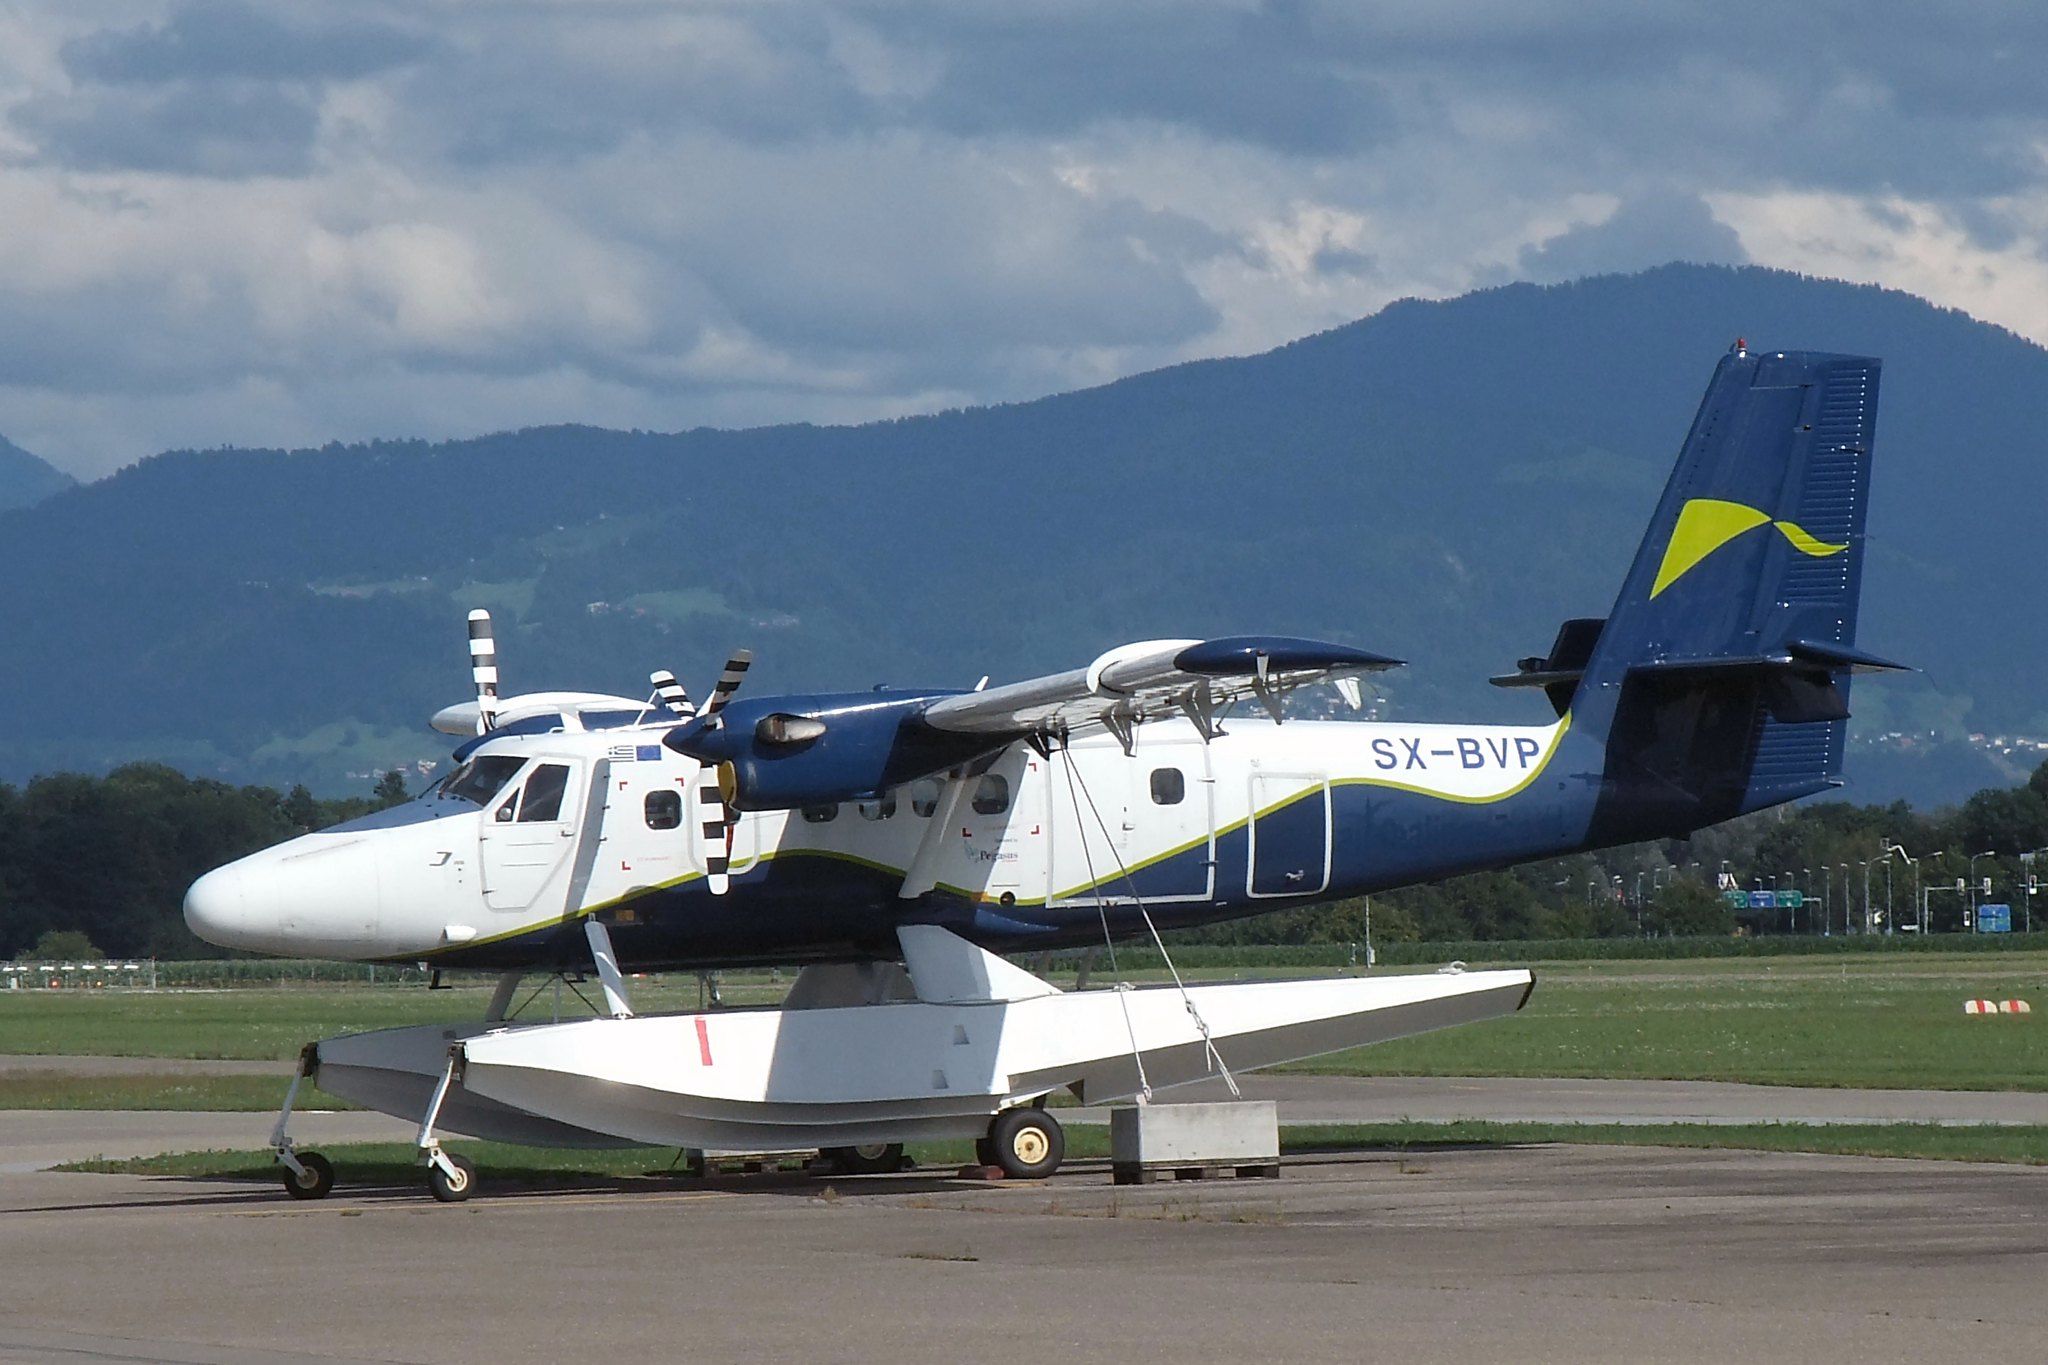 A De Havilland Canada DHC-6-300 Twin Otter parked at an airfield.